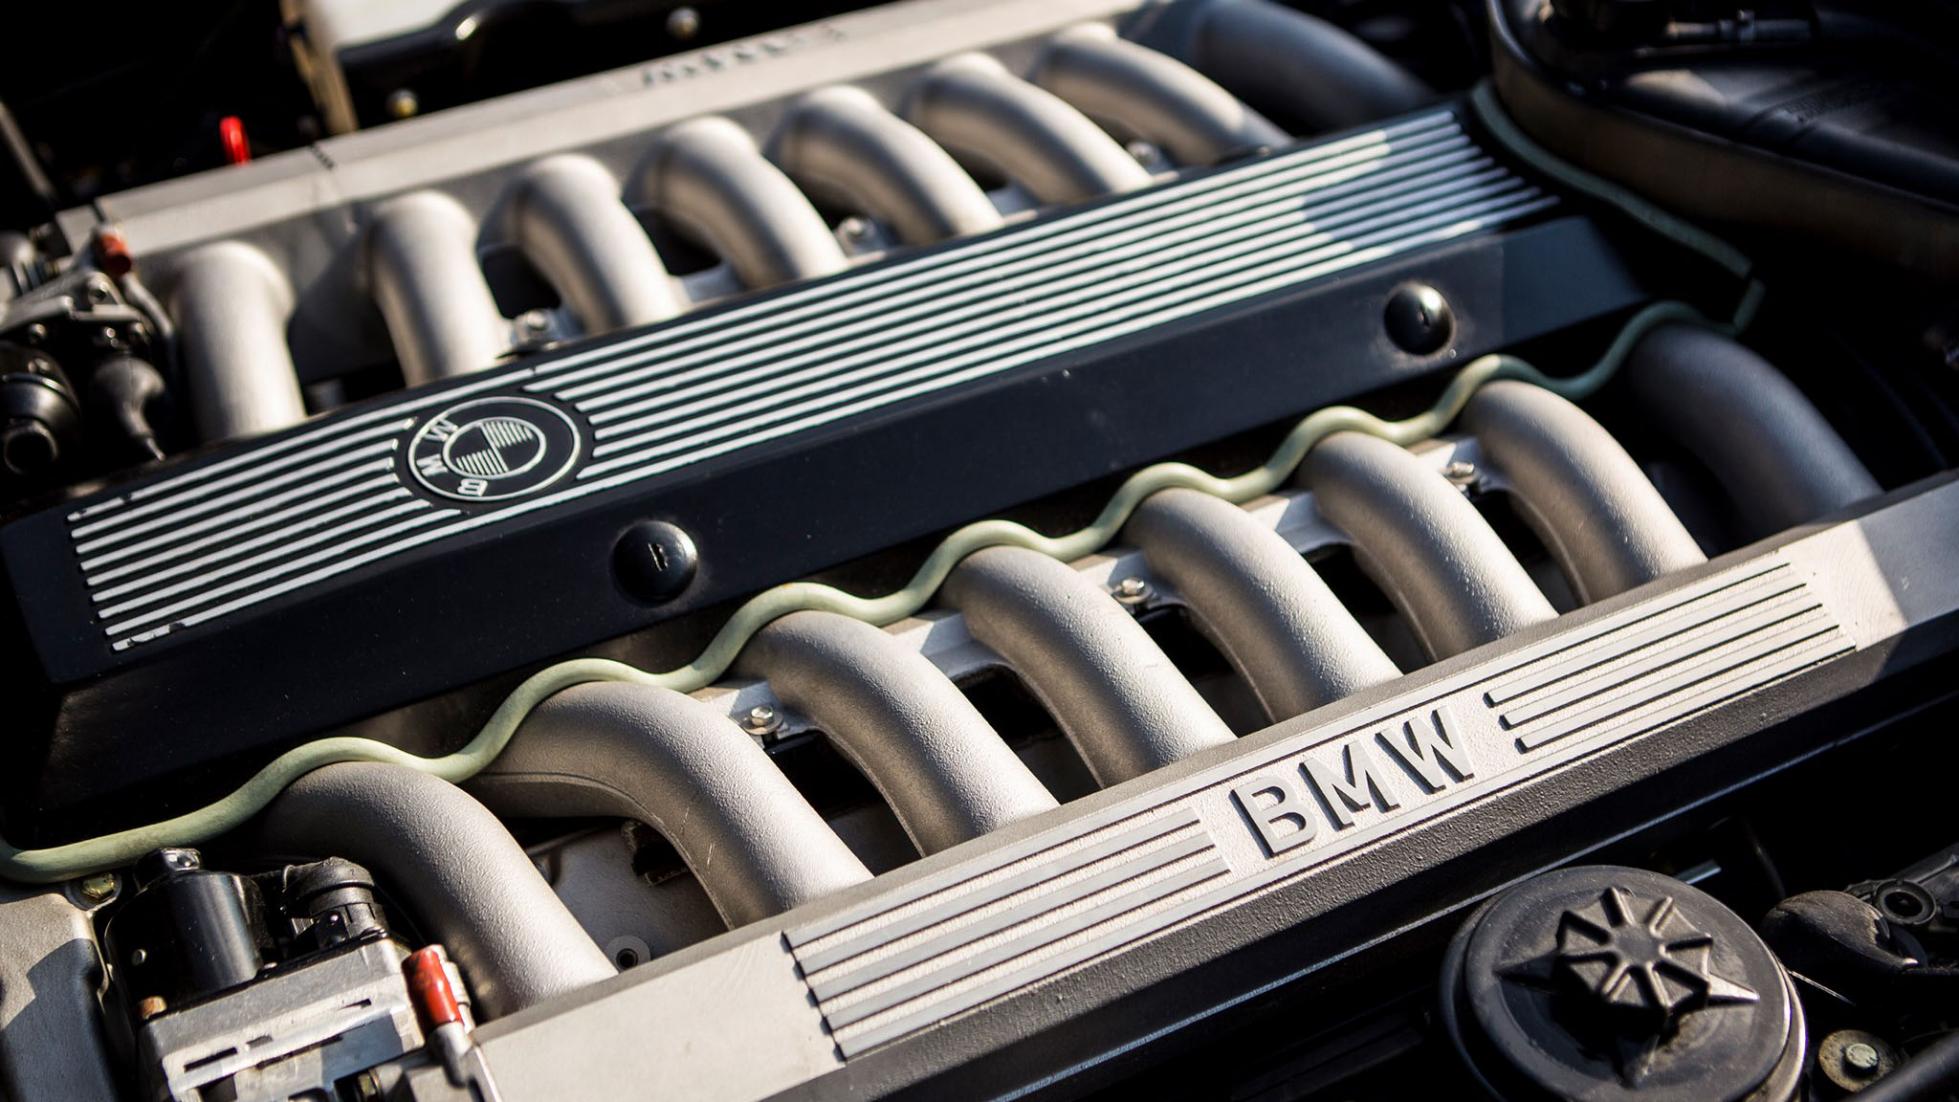 This amazing one-off BMW 7 Series has a V16 engine